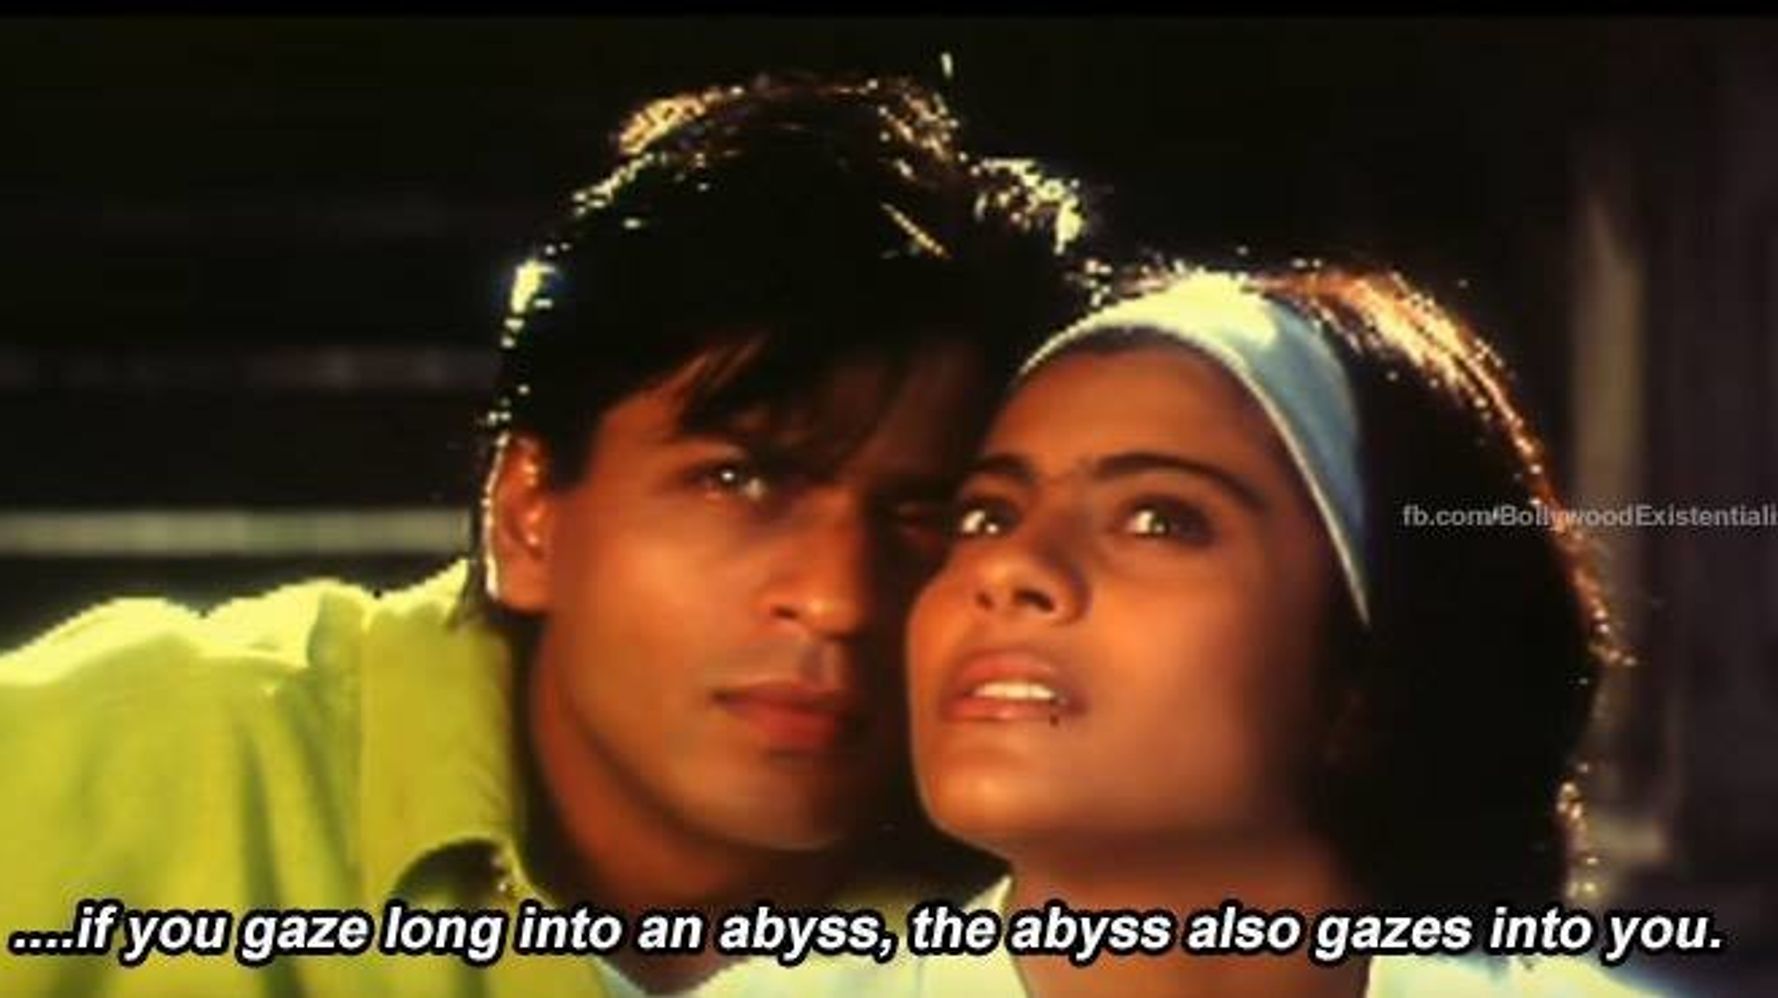 These Bollywood Memes With Existential Captions Are Damn Hilarious Huffpost Entertainment